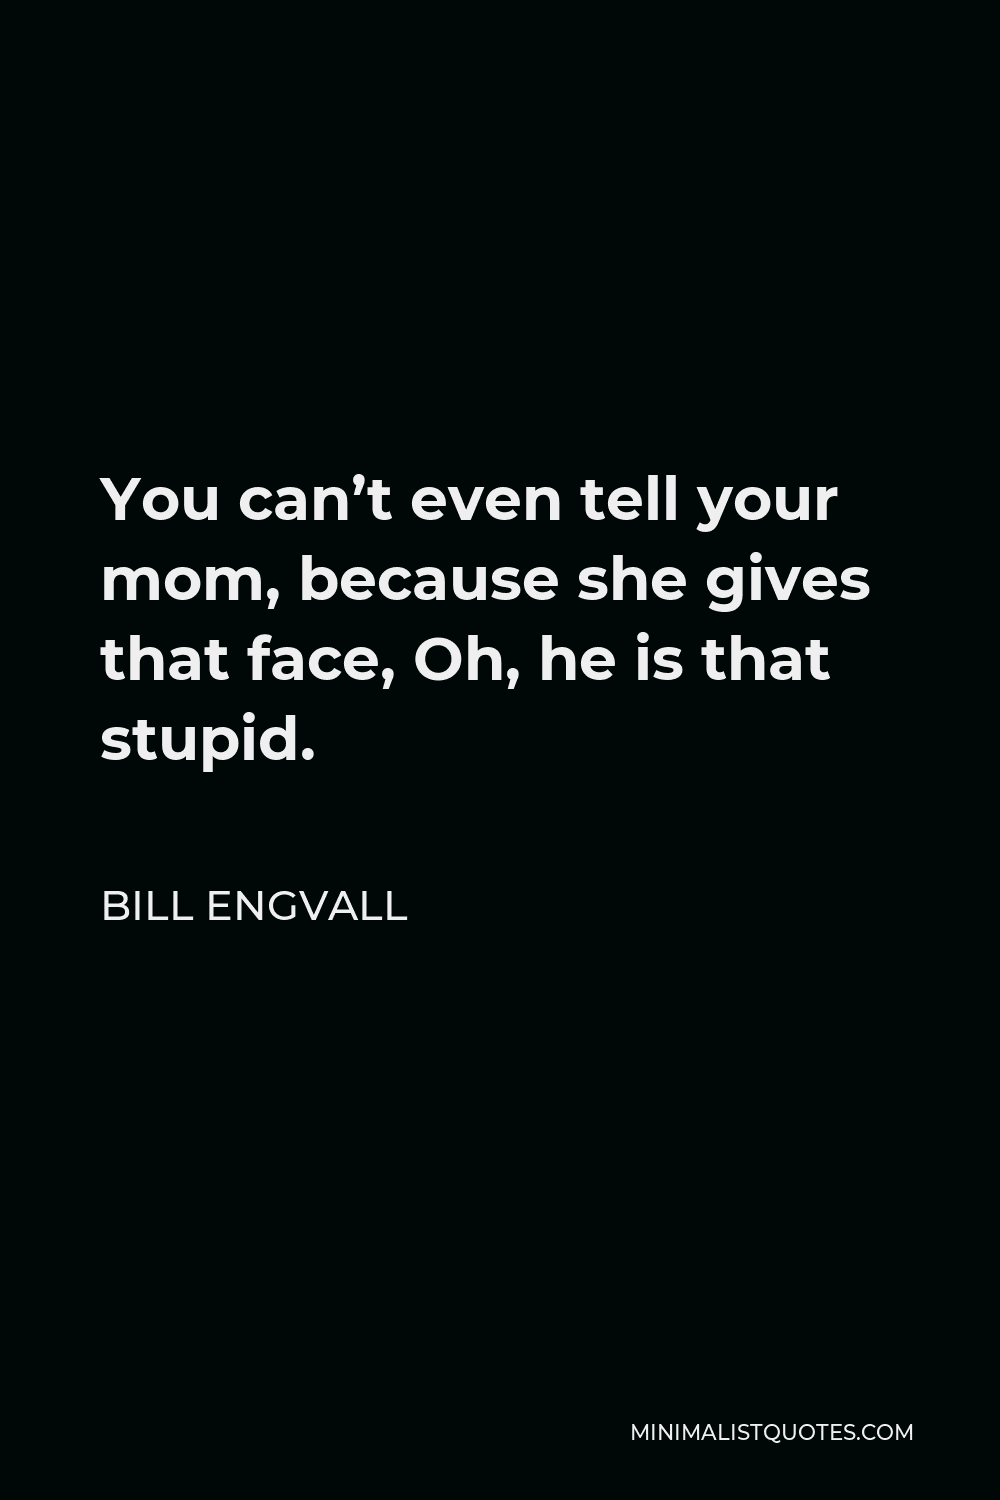 Bill Engvall Quote - You can’t even tell your mom, because she gives that face, Oh, he is that stupid.